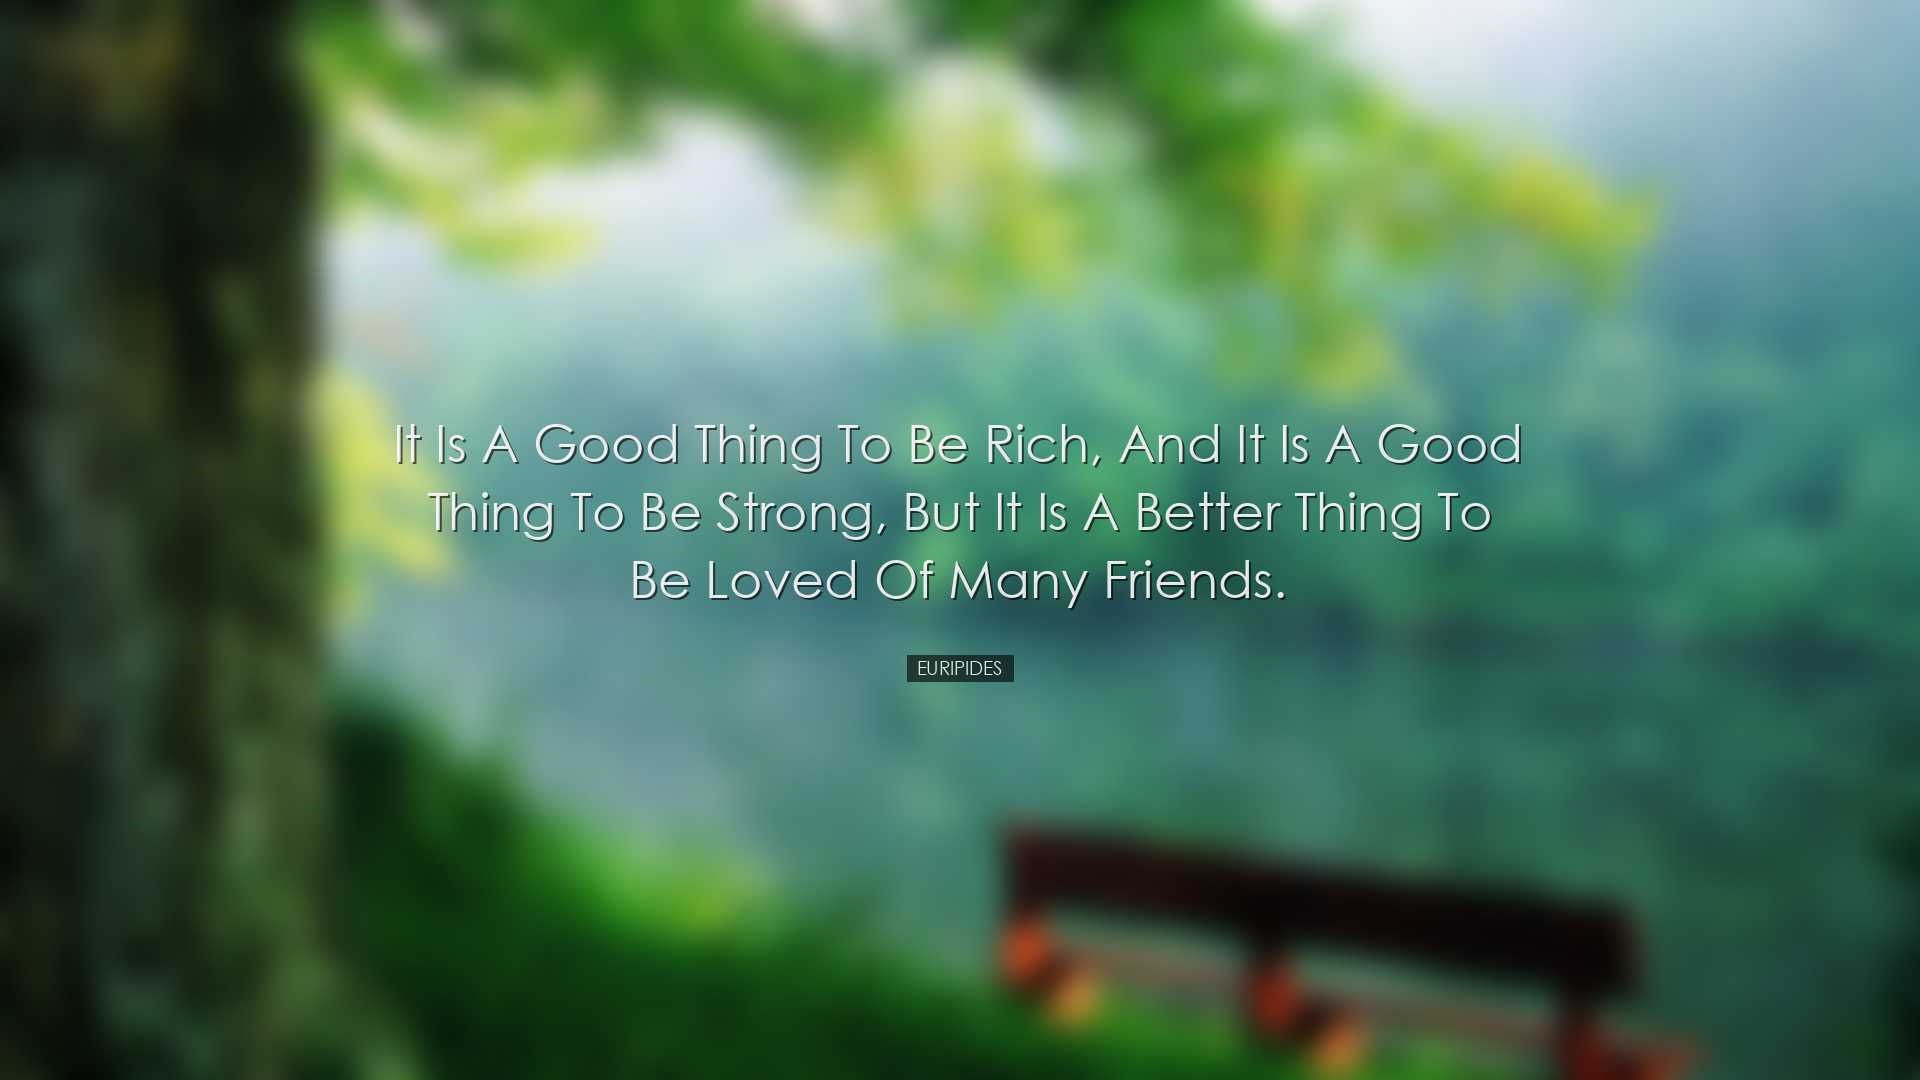 It is a good thing to be rich, and it is a good thing to be strong